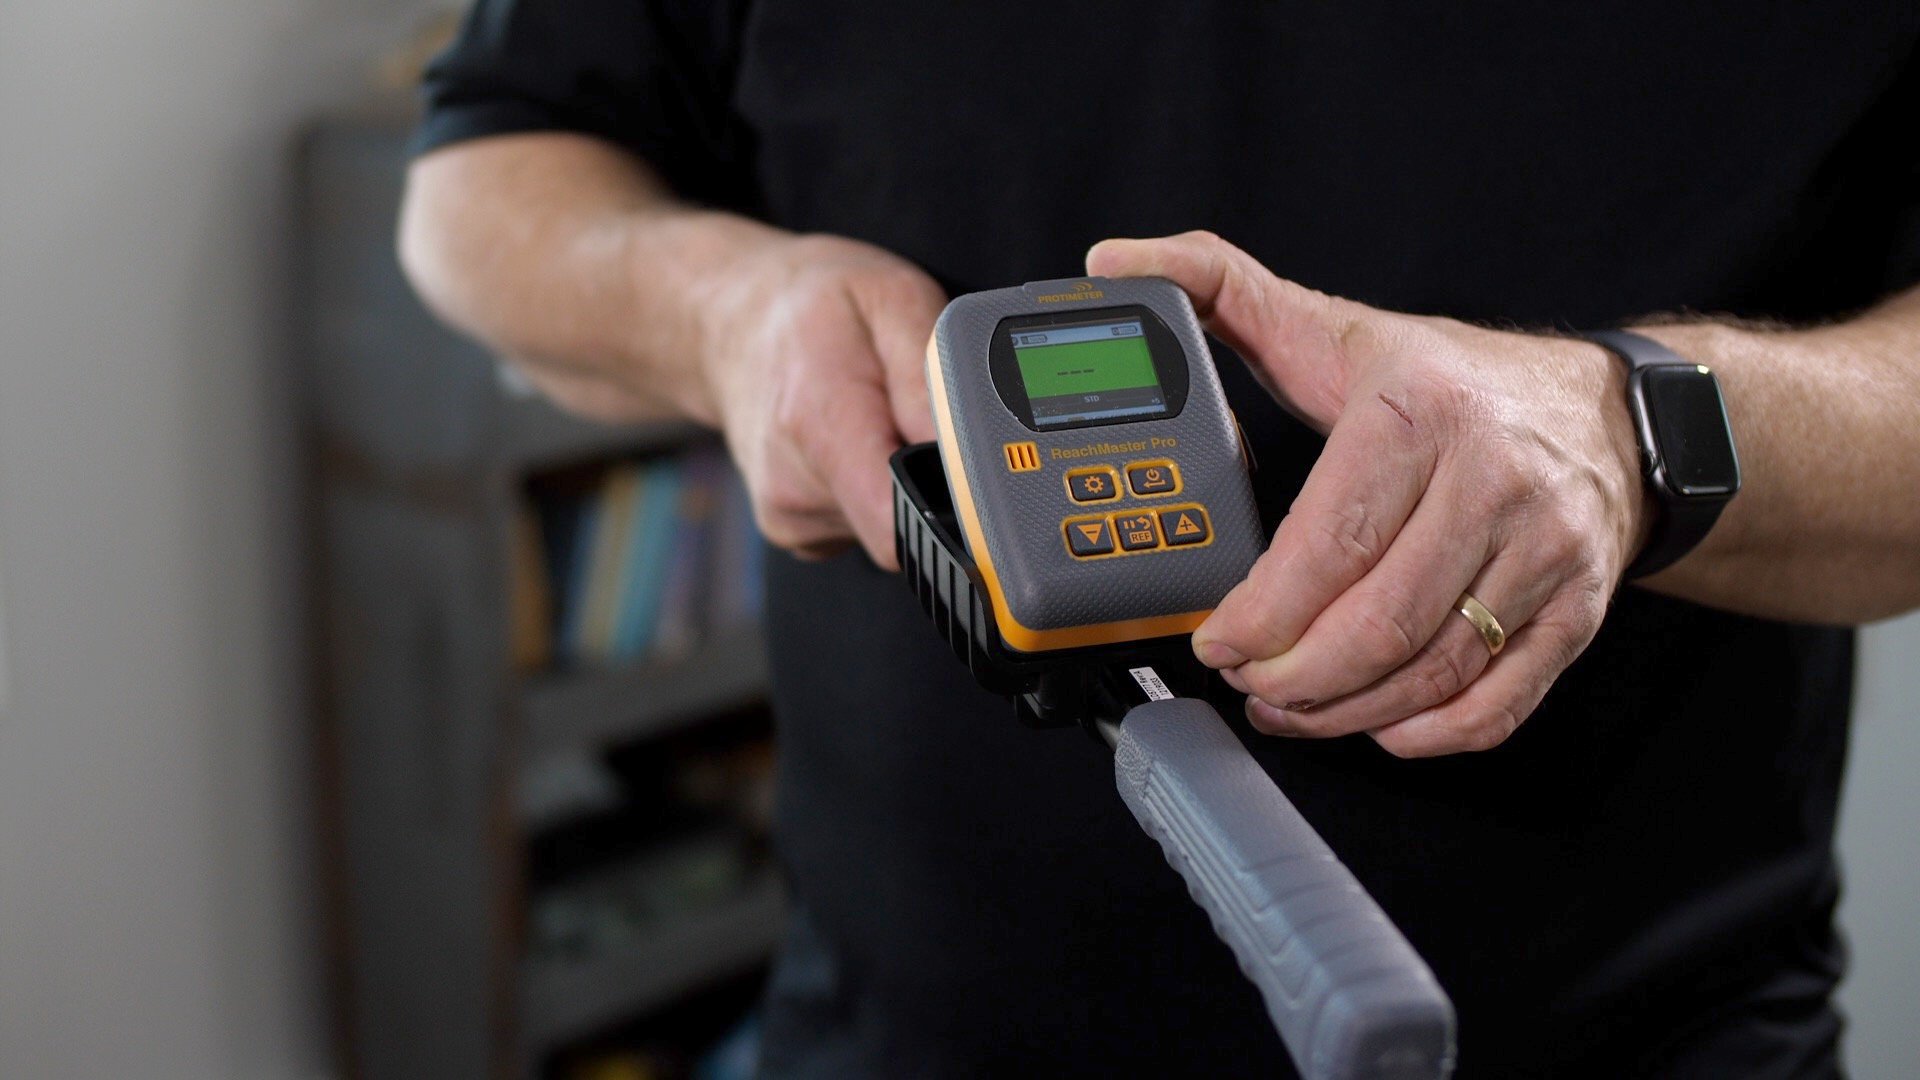 Home Inspection Training: Using a Moisture Meter